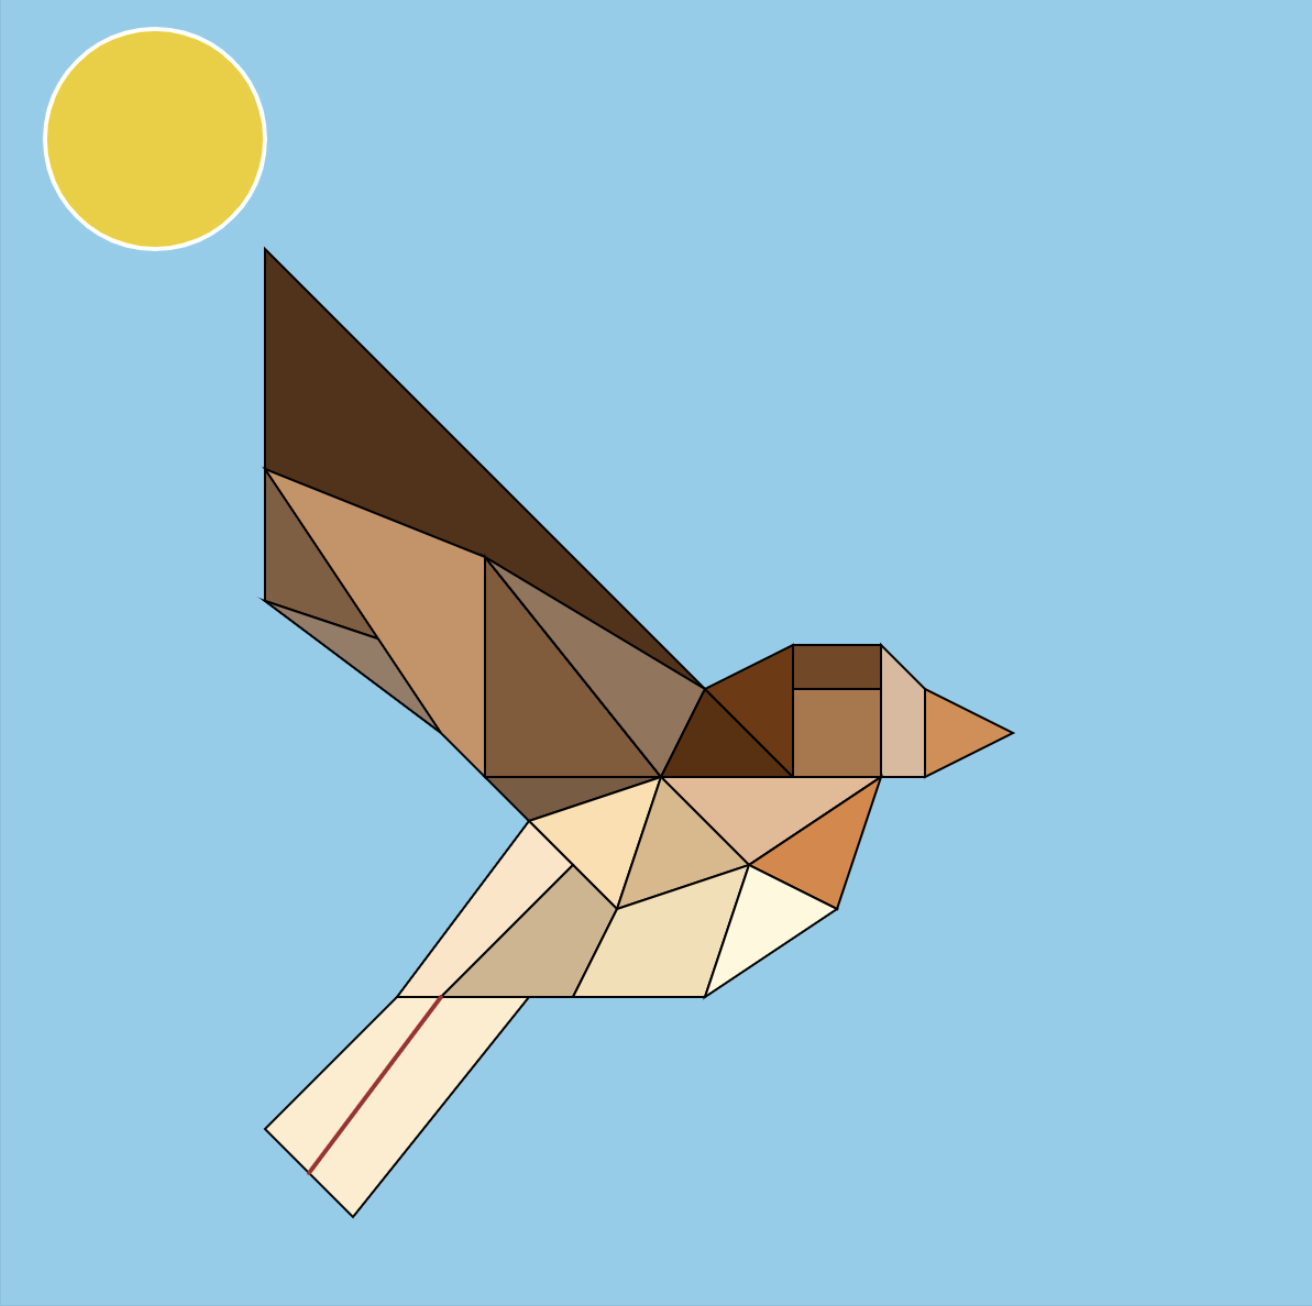 A bird made of dark brown and light brown shapes is flying in a light blue sky with a yellow sun in the top left corner.